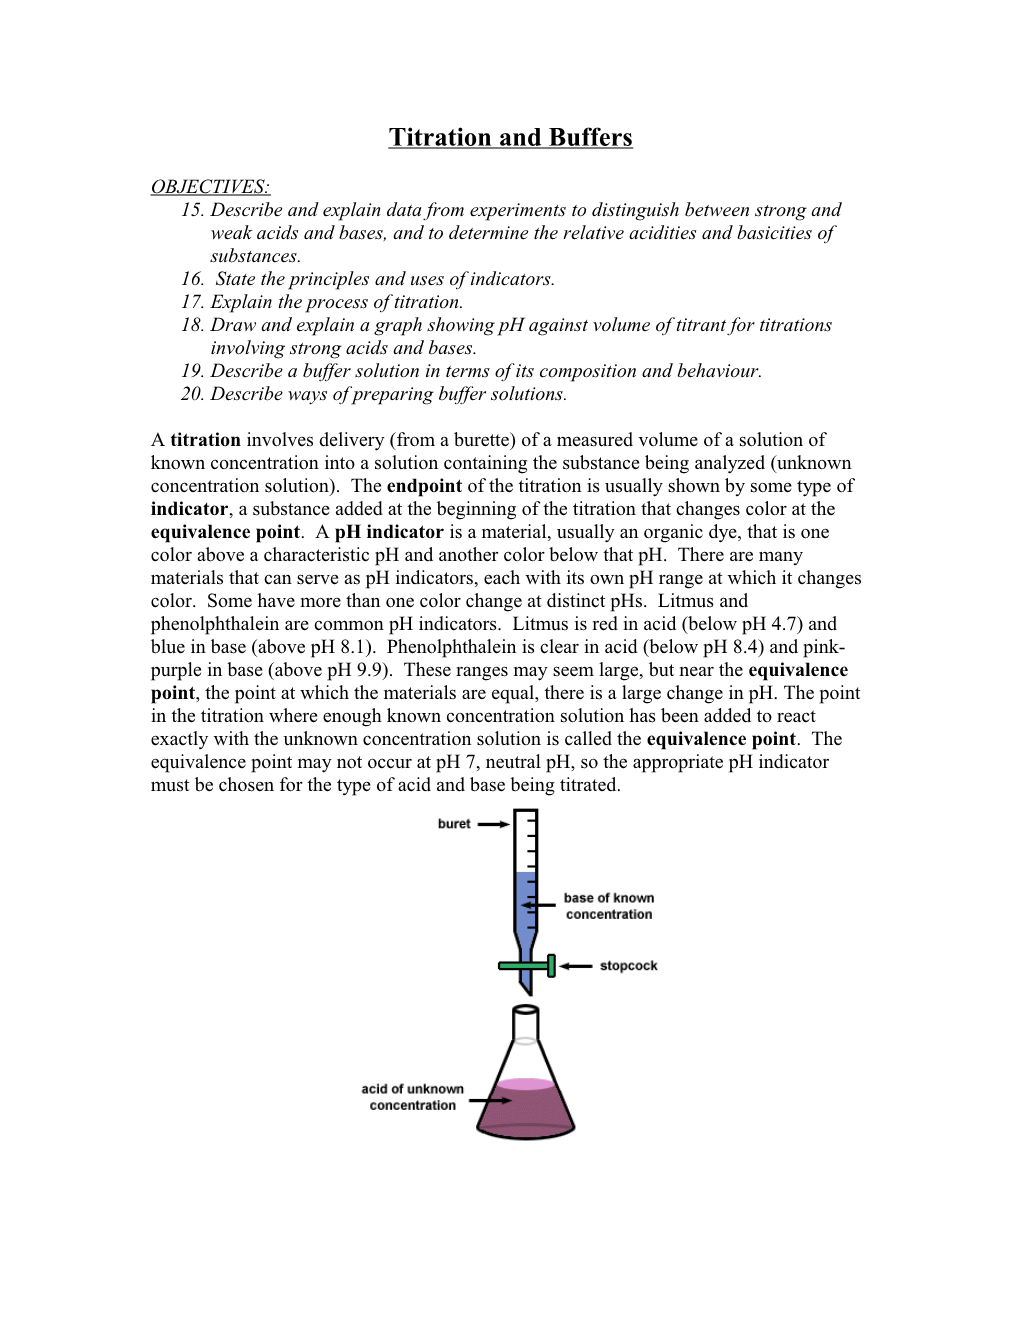 Buffers and Titration